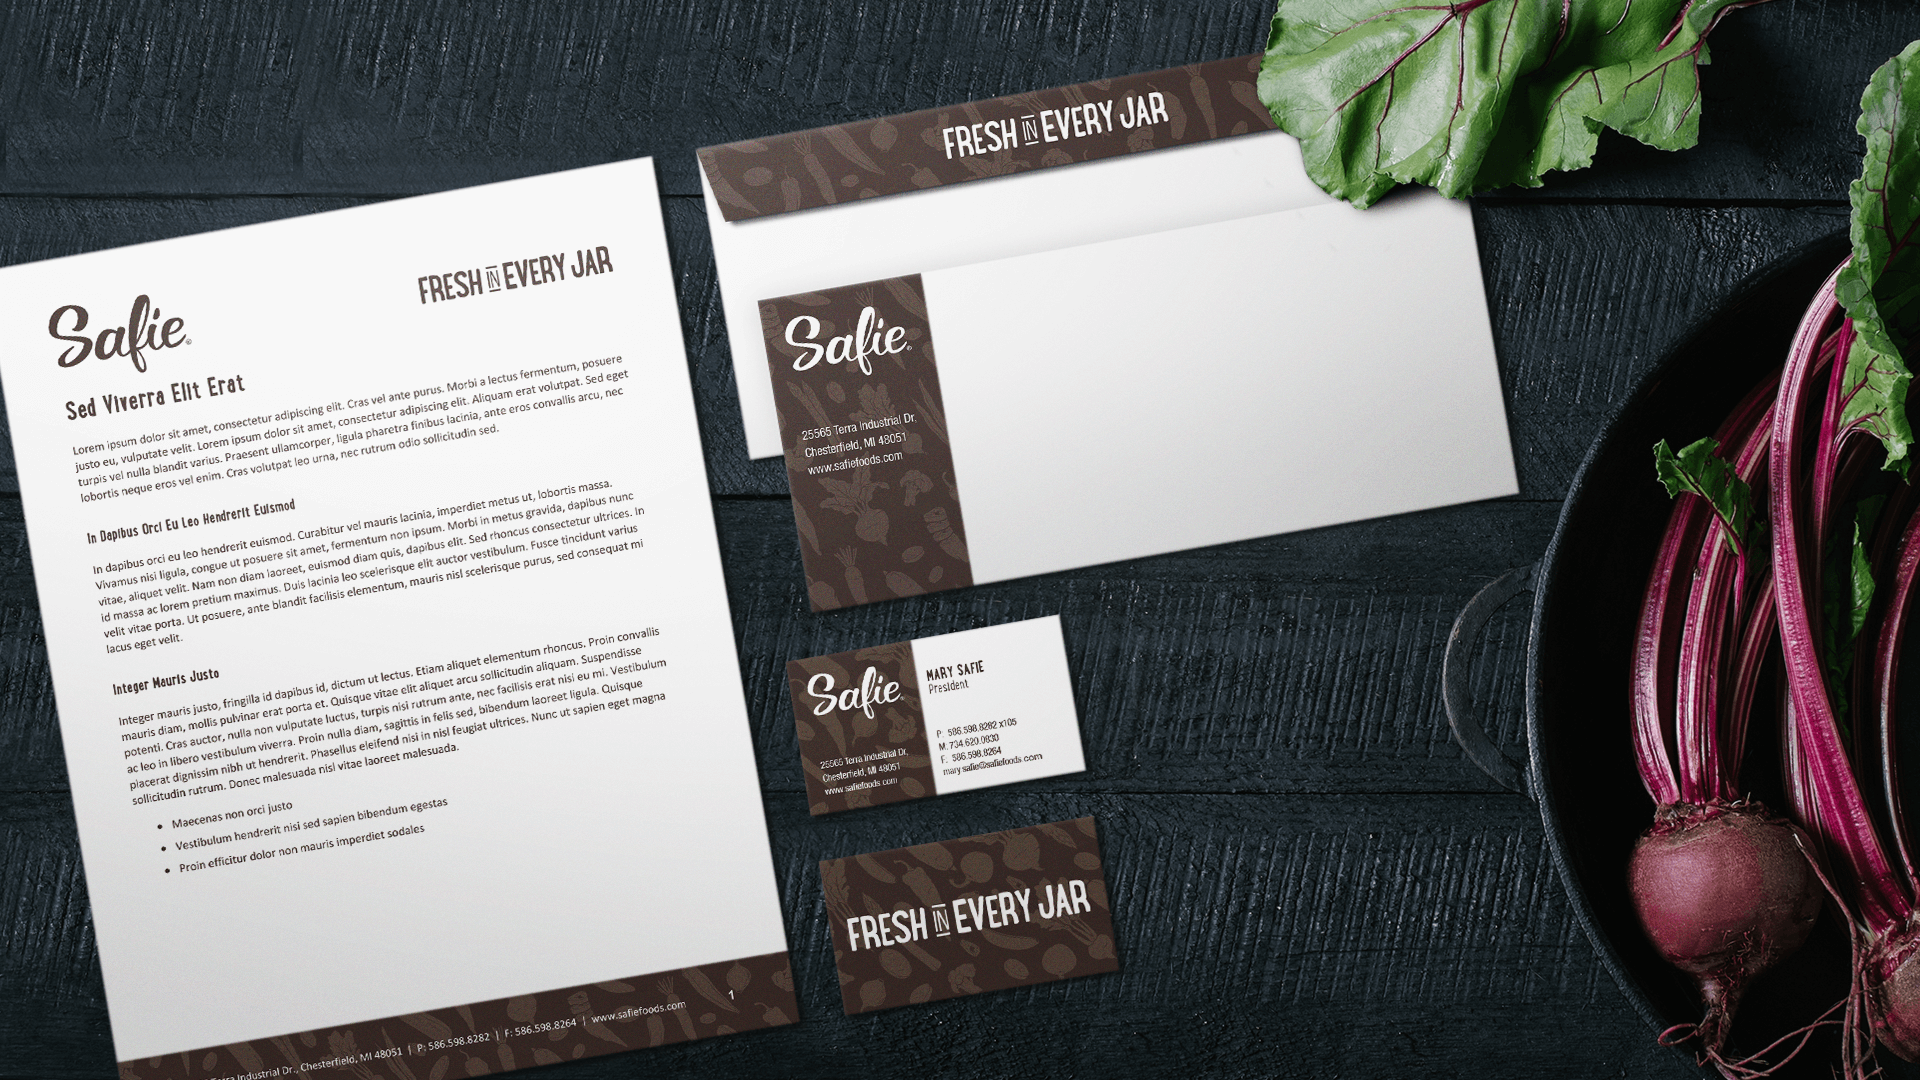 We created branded stationary, envelopes and new business cards for the company